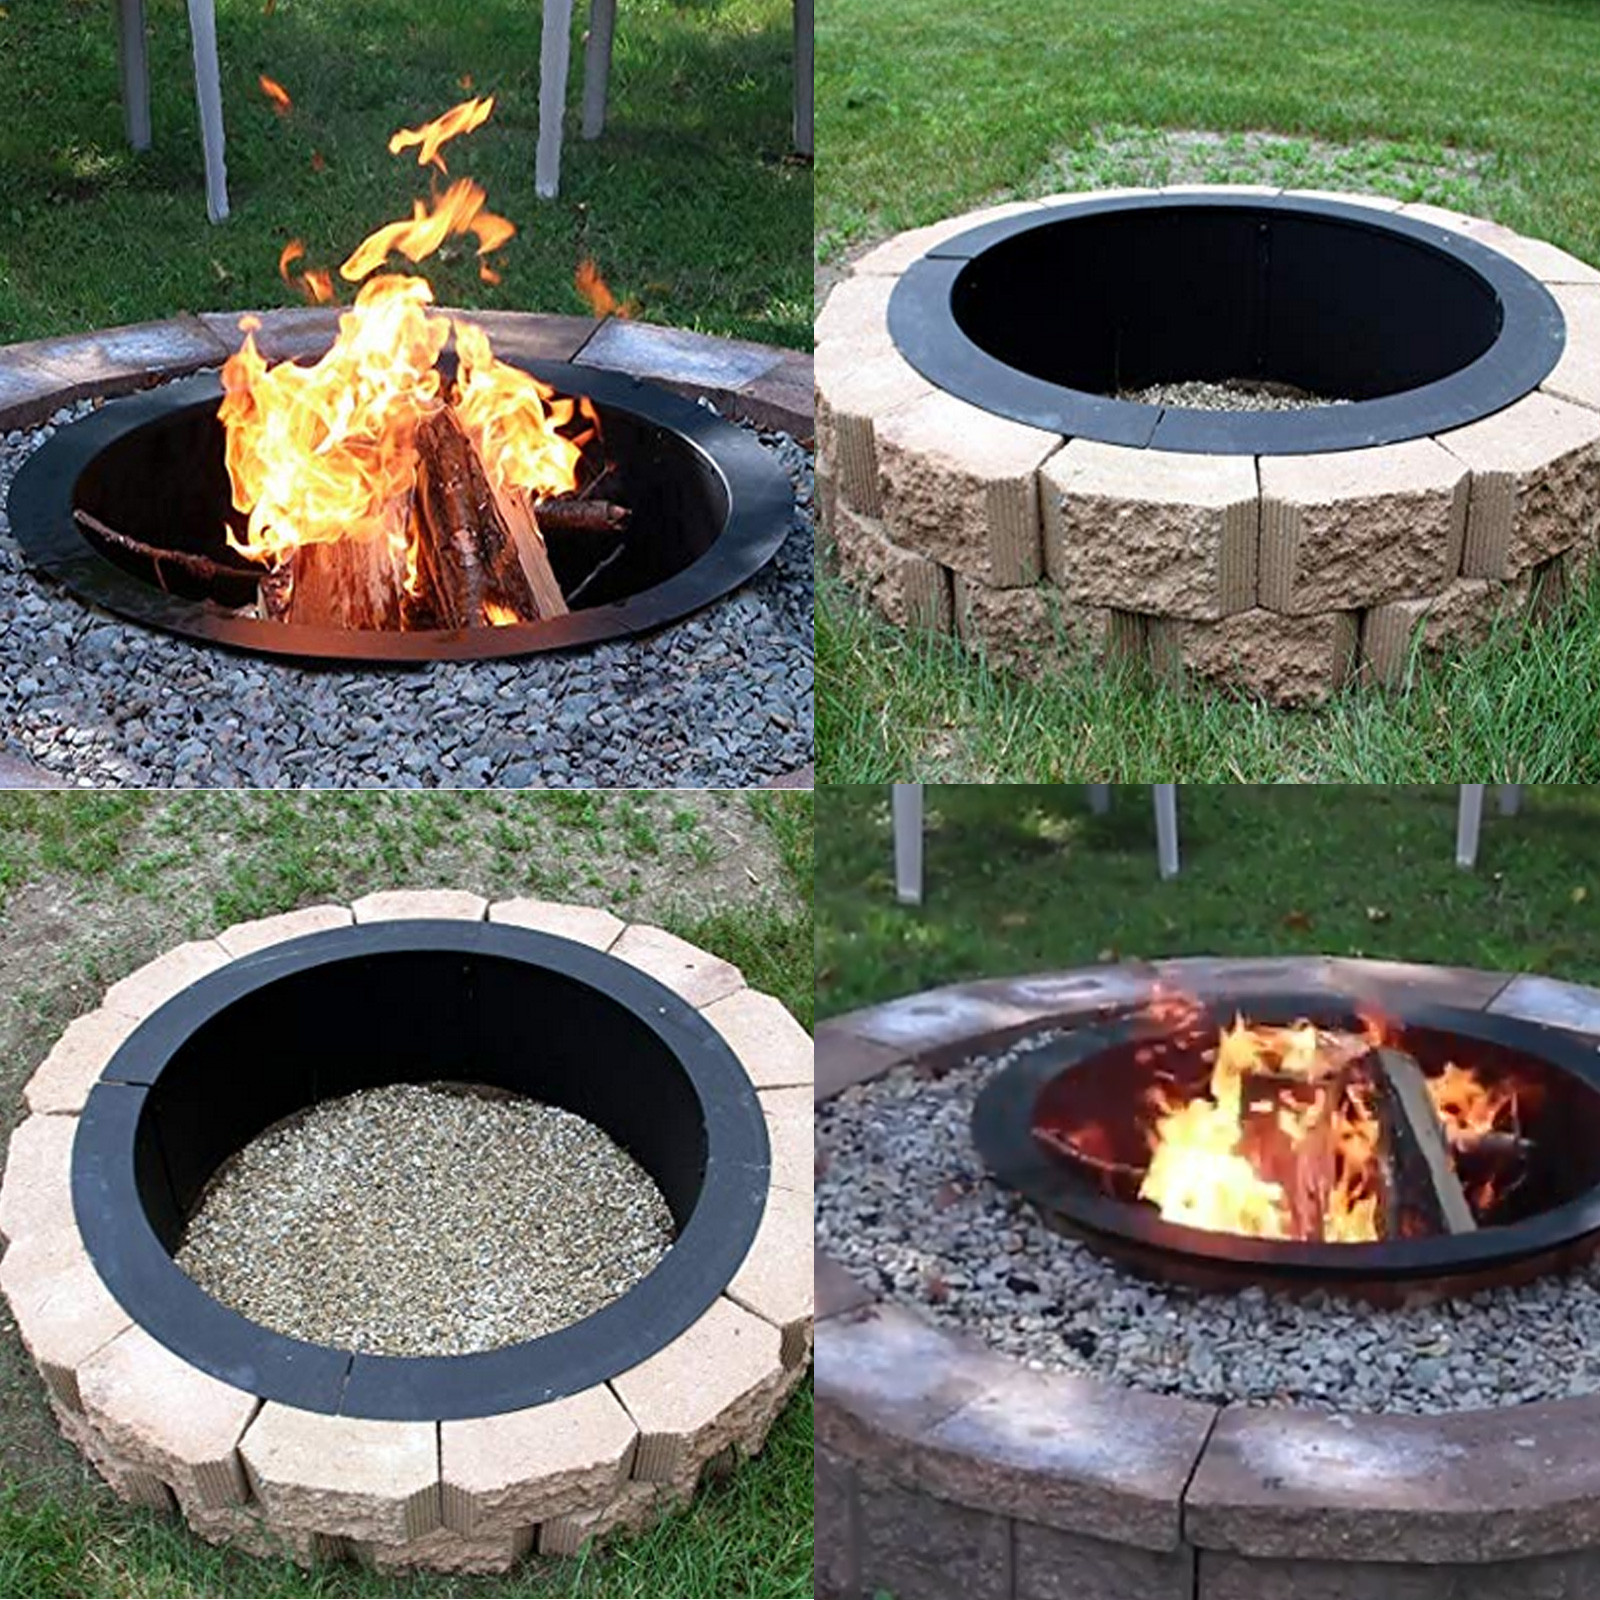 Outdoor Fire Pit Ring Kits Sunnydaze wood burning outdoor fire pit ring / liner